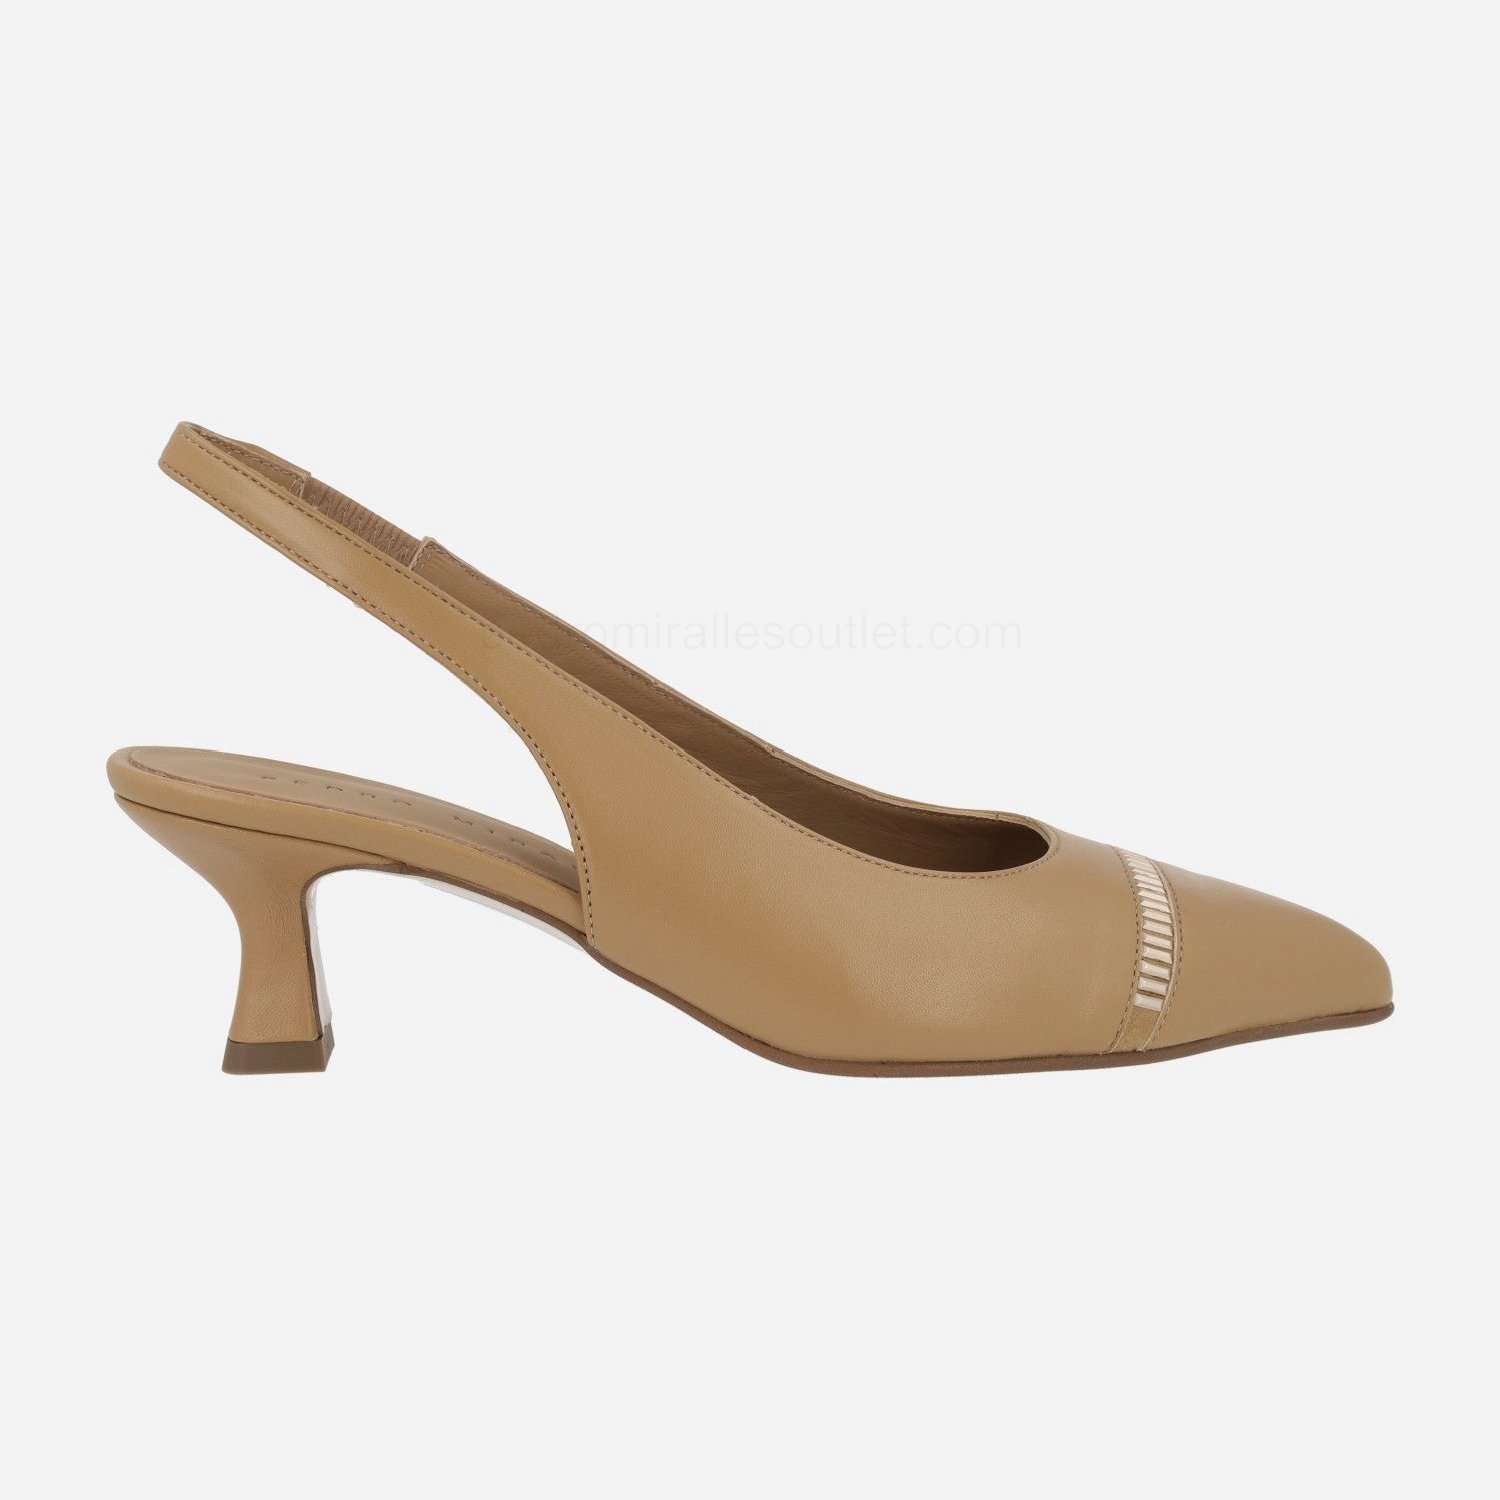 (image for) Camel leather open heel pumps with golden details | pedro miralles outlet-1767